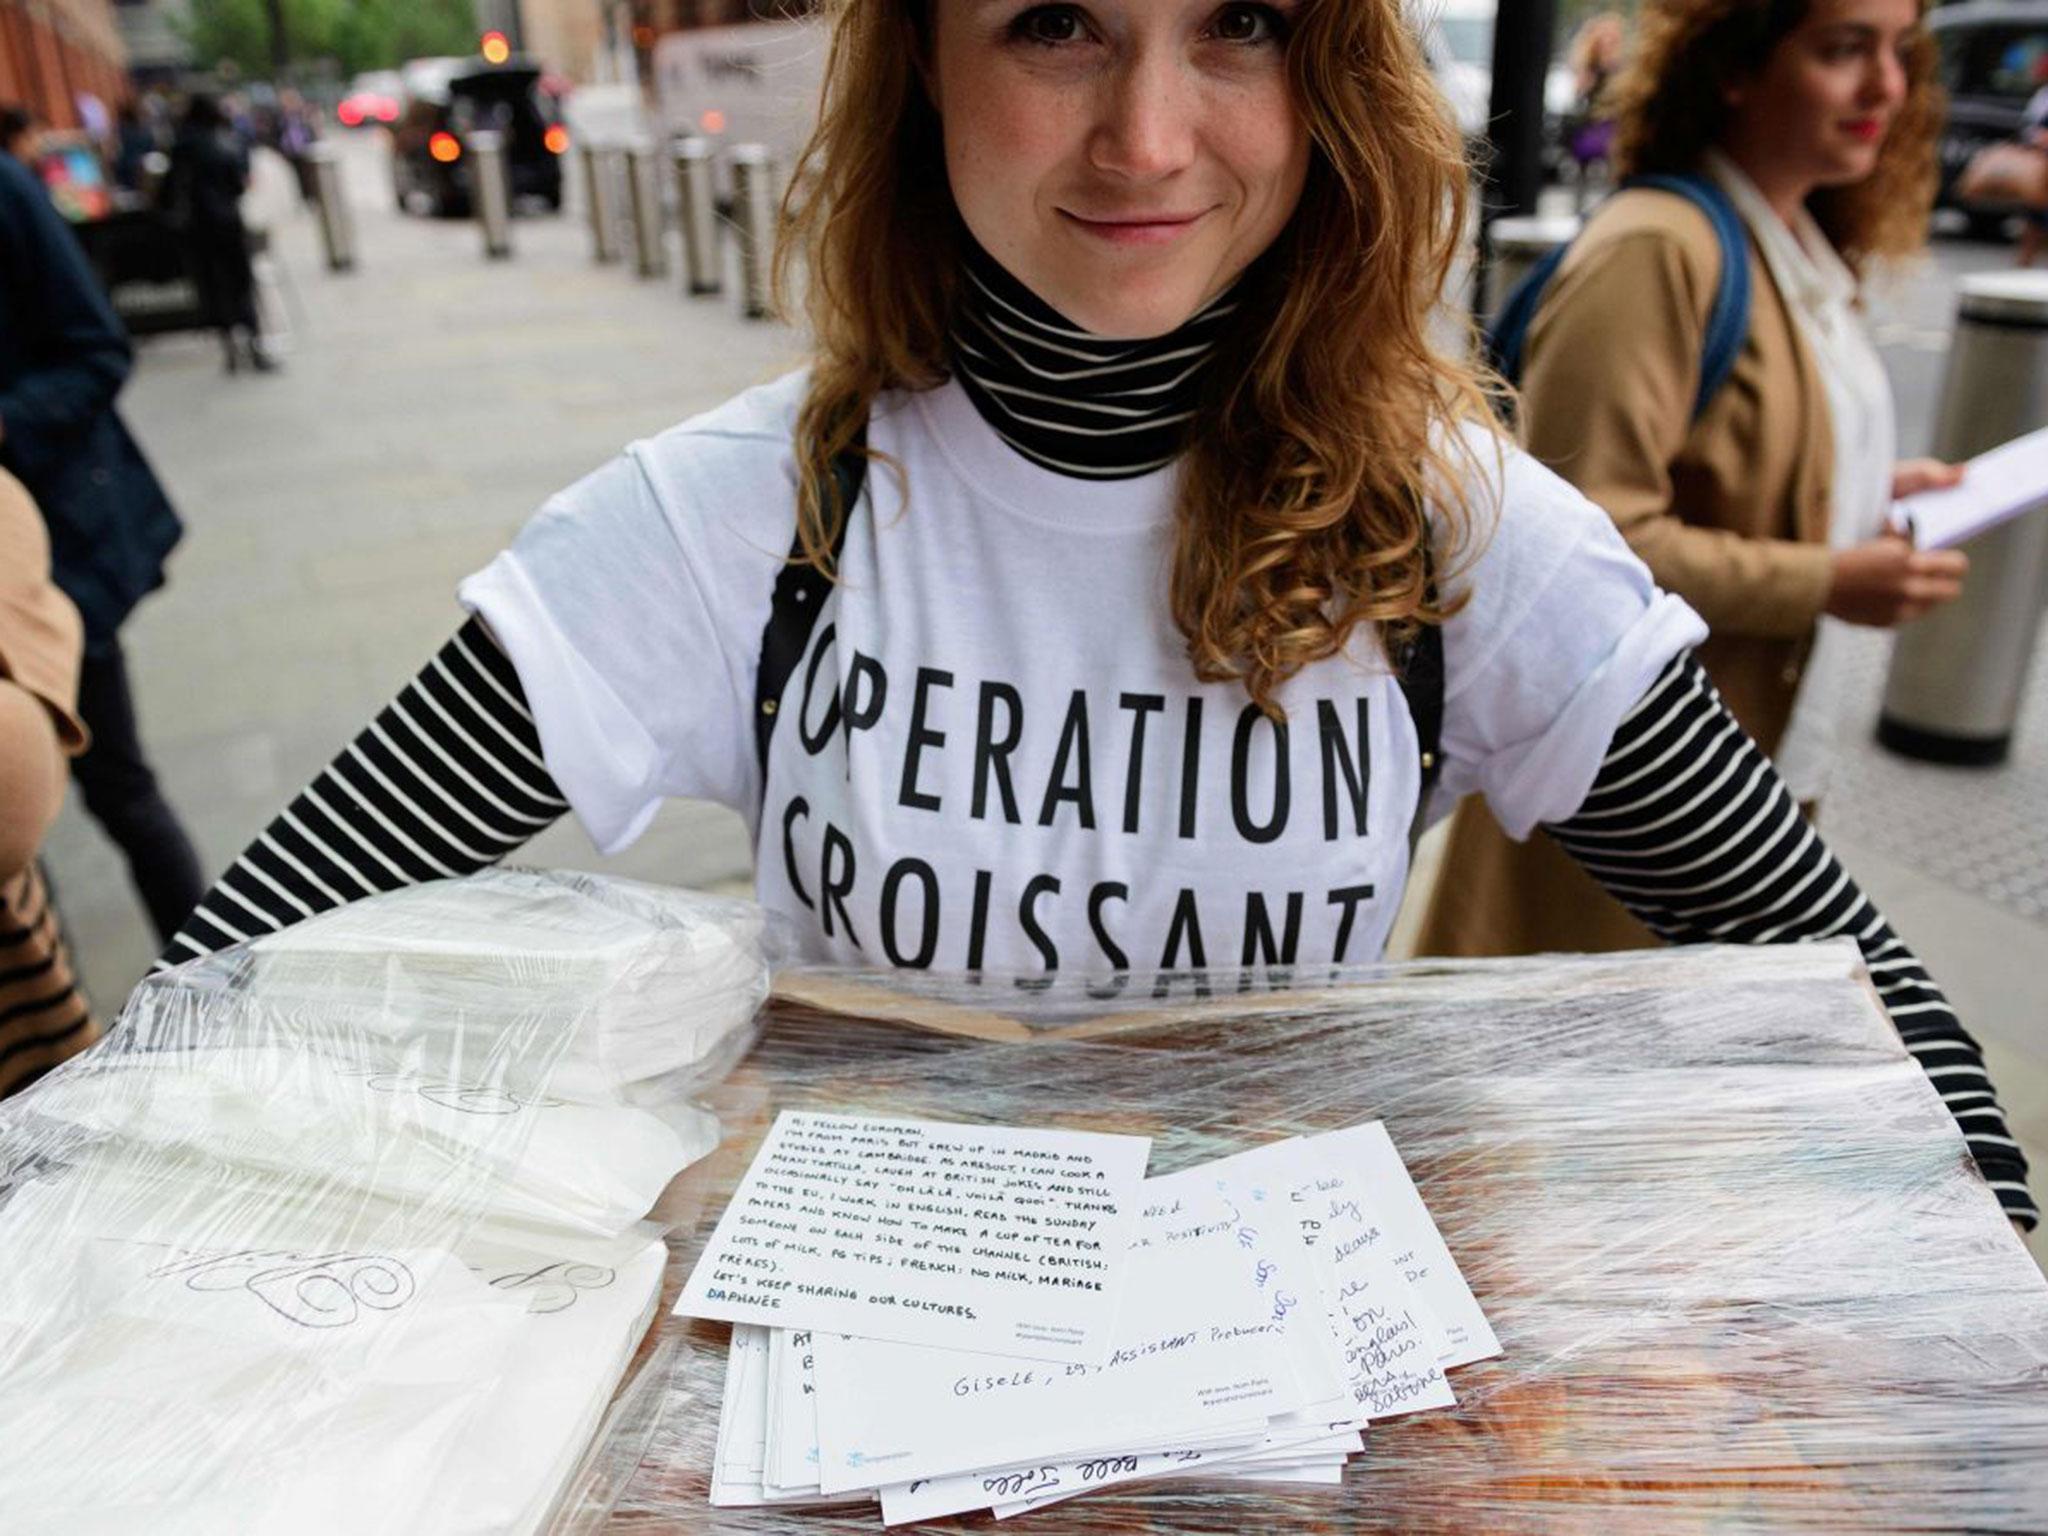 Pro-remain campaigners from 'Operation Croissant', a French pro-EU group, hand out postcards written by Parisians urging people in the UK to vote to remain in the EU